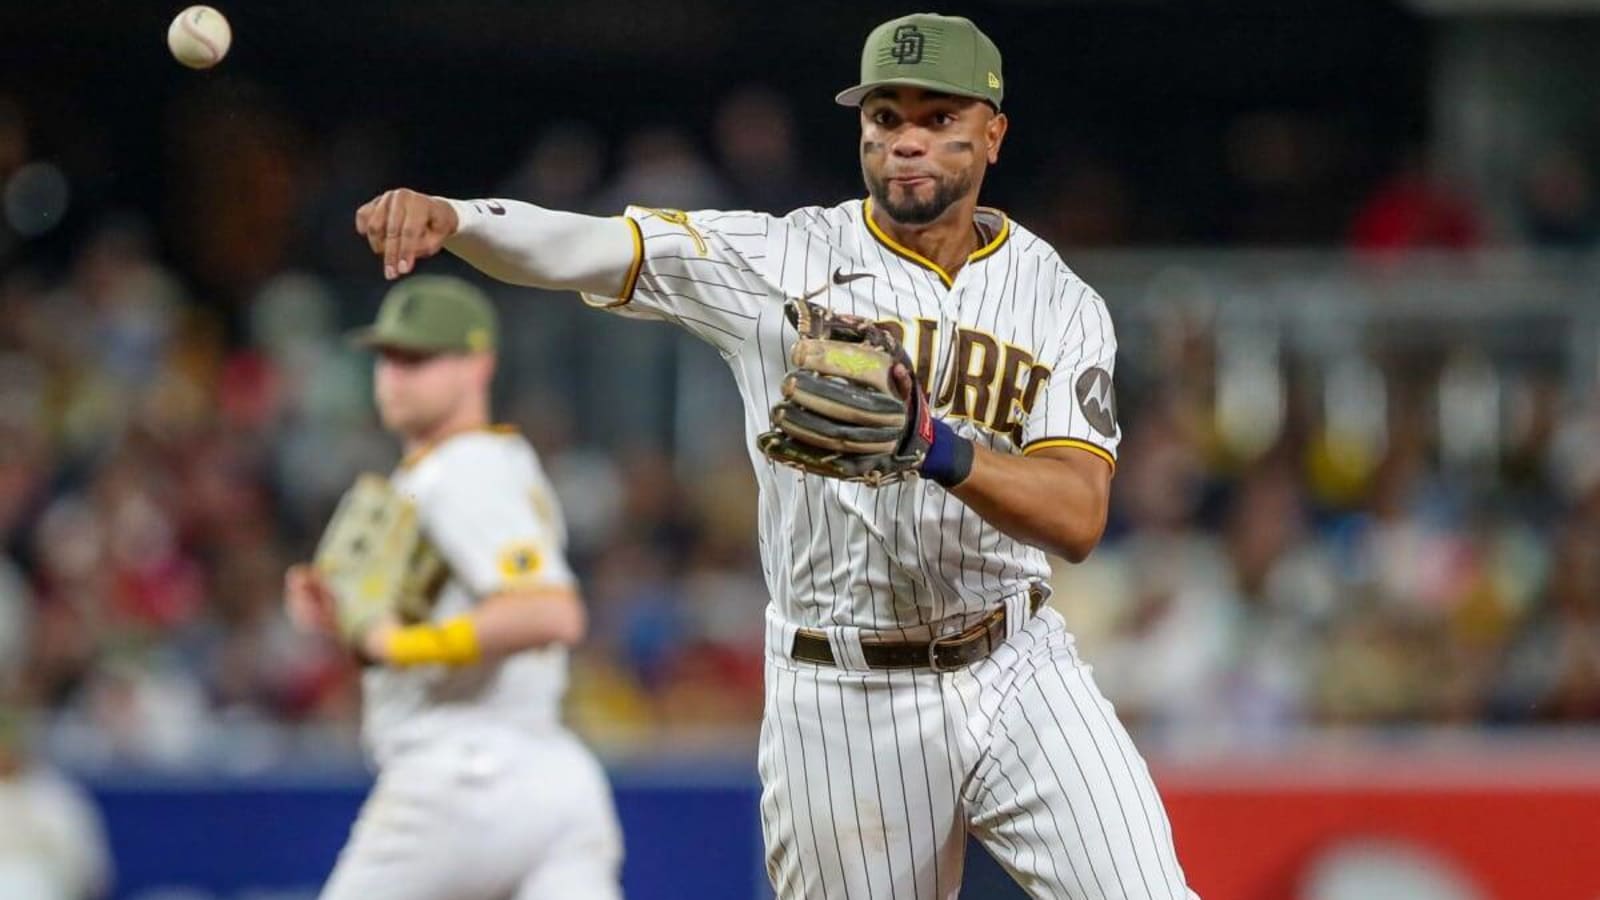 Padres Notes: 2nd Straight Embarrassing Loss to Boston, Lane Thomas to SD, Azocar Added & More